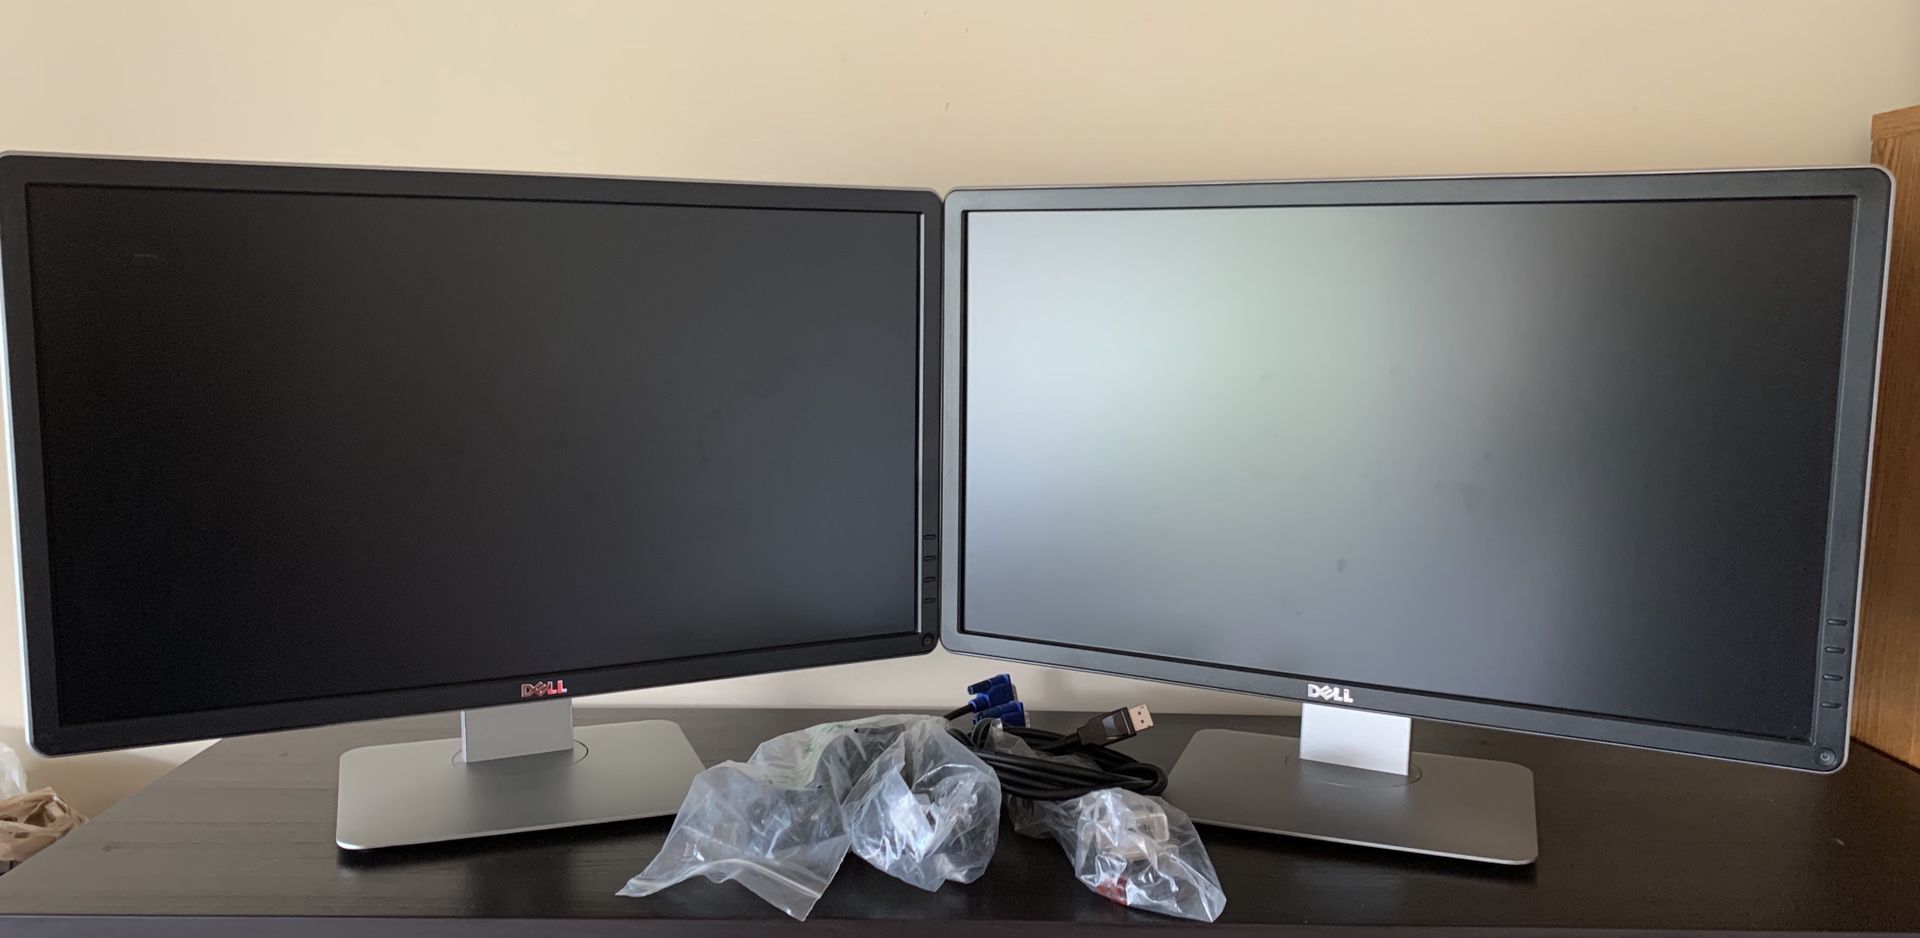 Matched pair of Professional Dell Computer Monitor P2314Ht 1920 x 1080 Resolution 23" WideScreen LCD Display